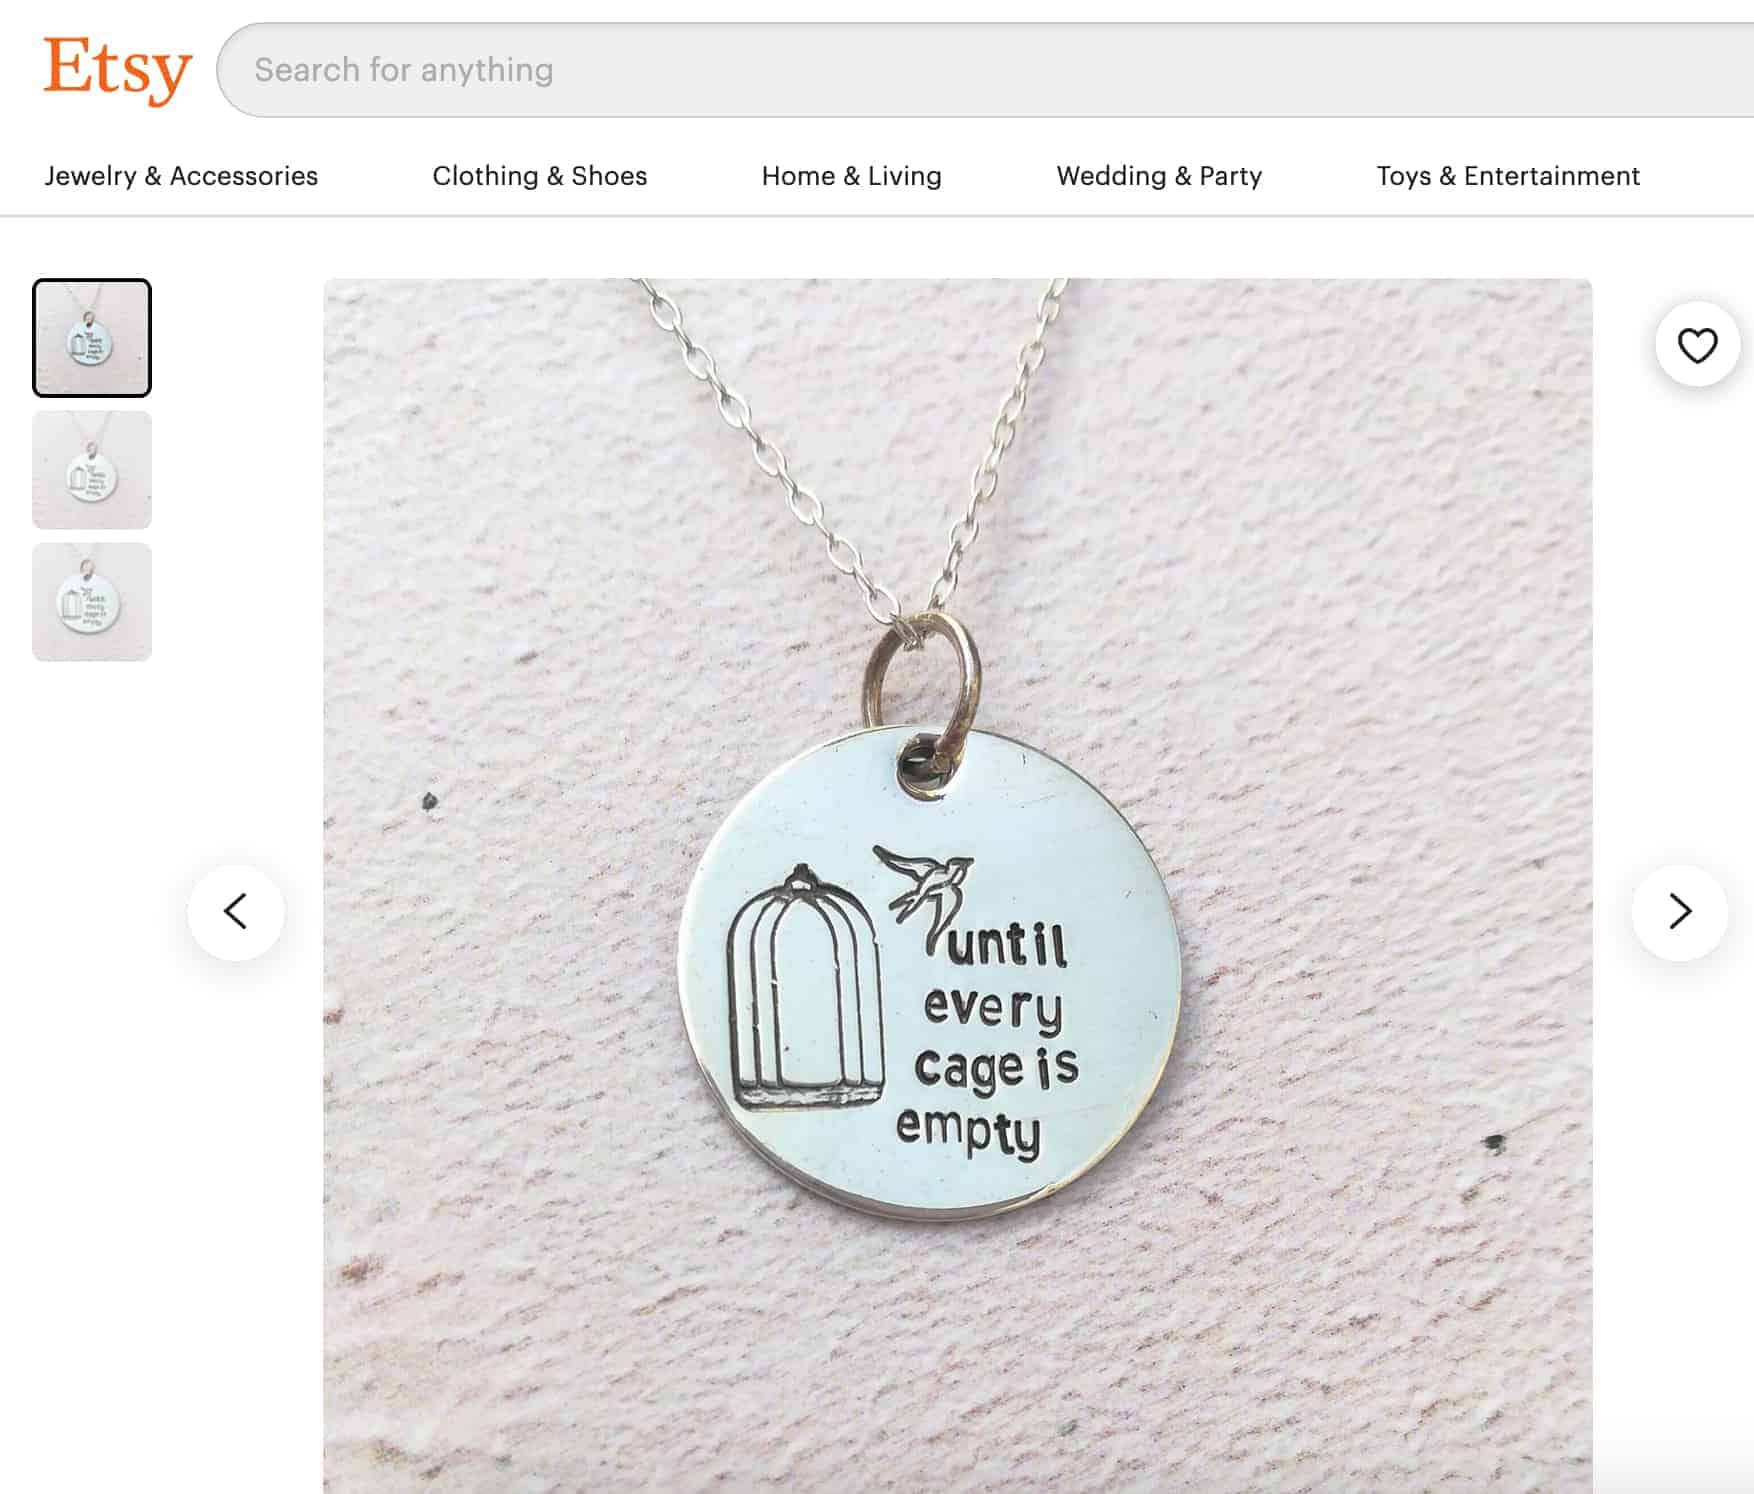 Necklace with a bird flying away from cage. Text on necklace says "until every cage is empty"